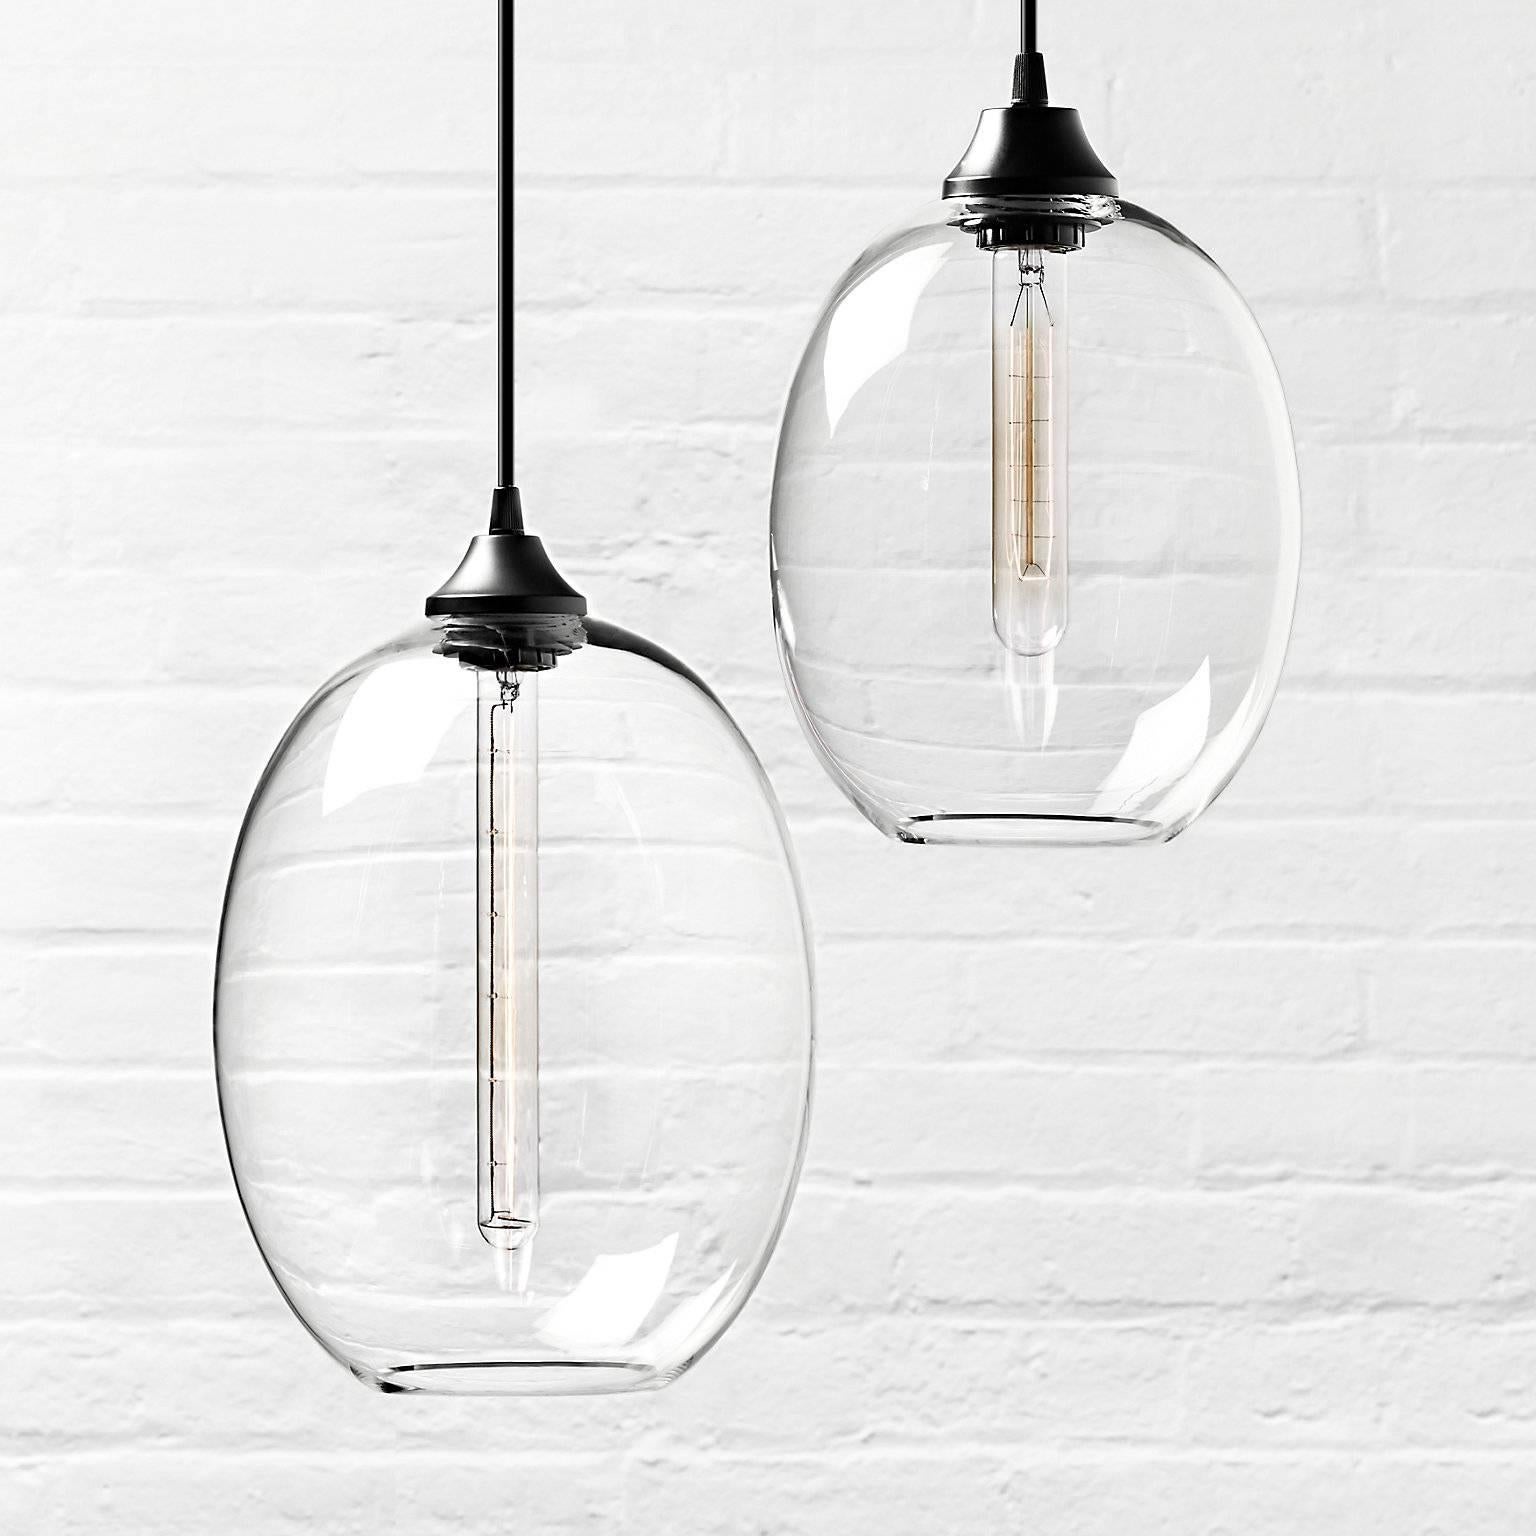 When paired together, the brilliant proportions of the Grand and Petite Ellipse pendants complement one another to create an elegant and distinctive design. Every single glass pendant light that comes from Niche is hand-blown by real human beings in